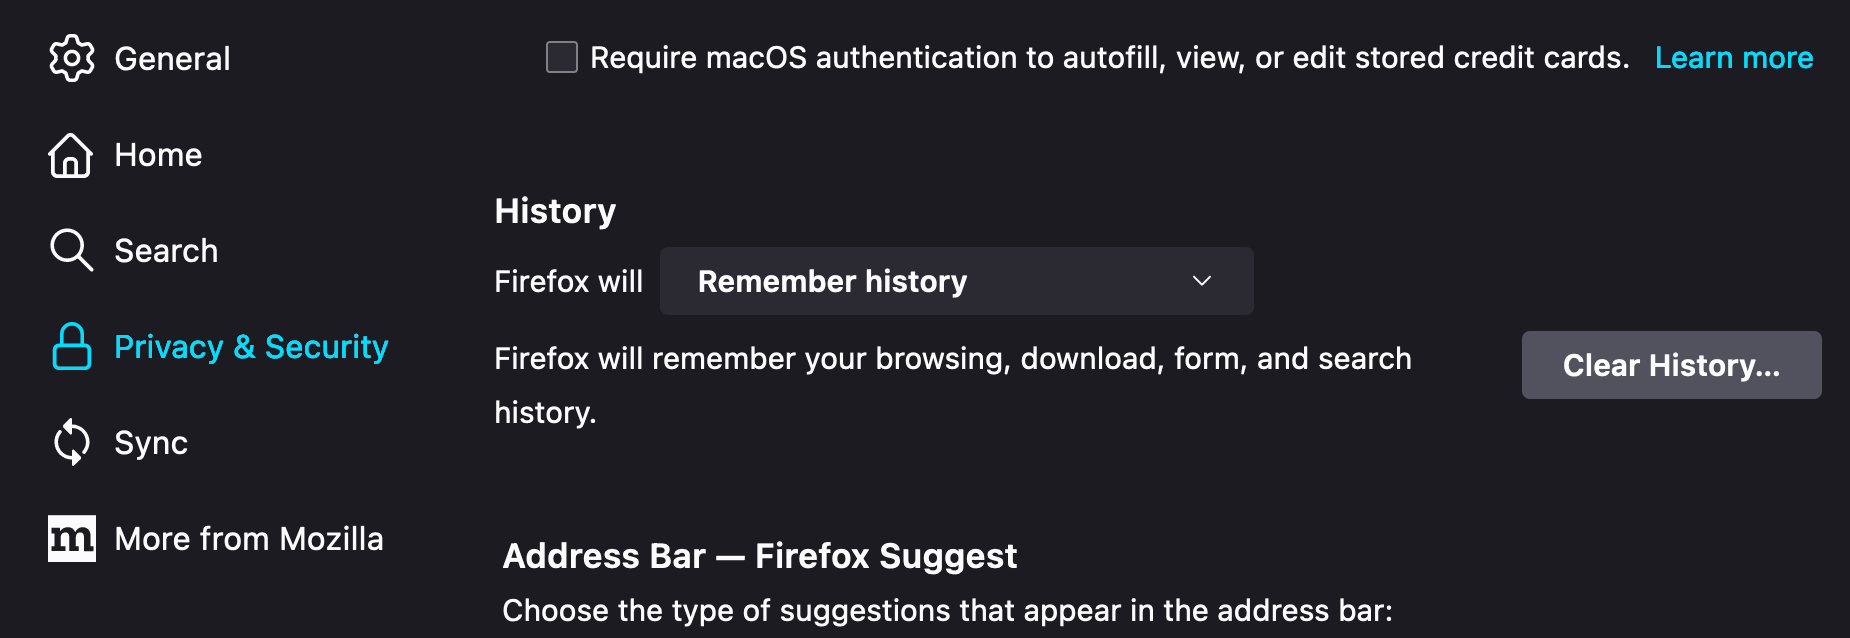 A screenshot of the Firefox Privacy & Security settings with the Clear History button showing.